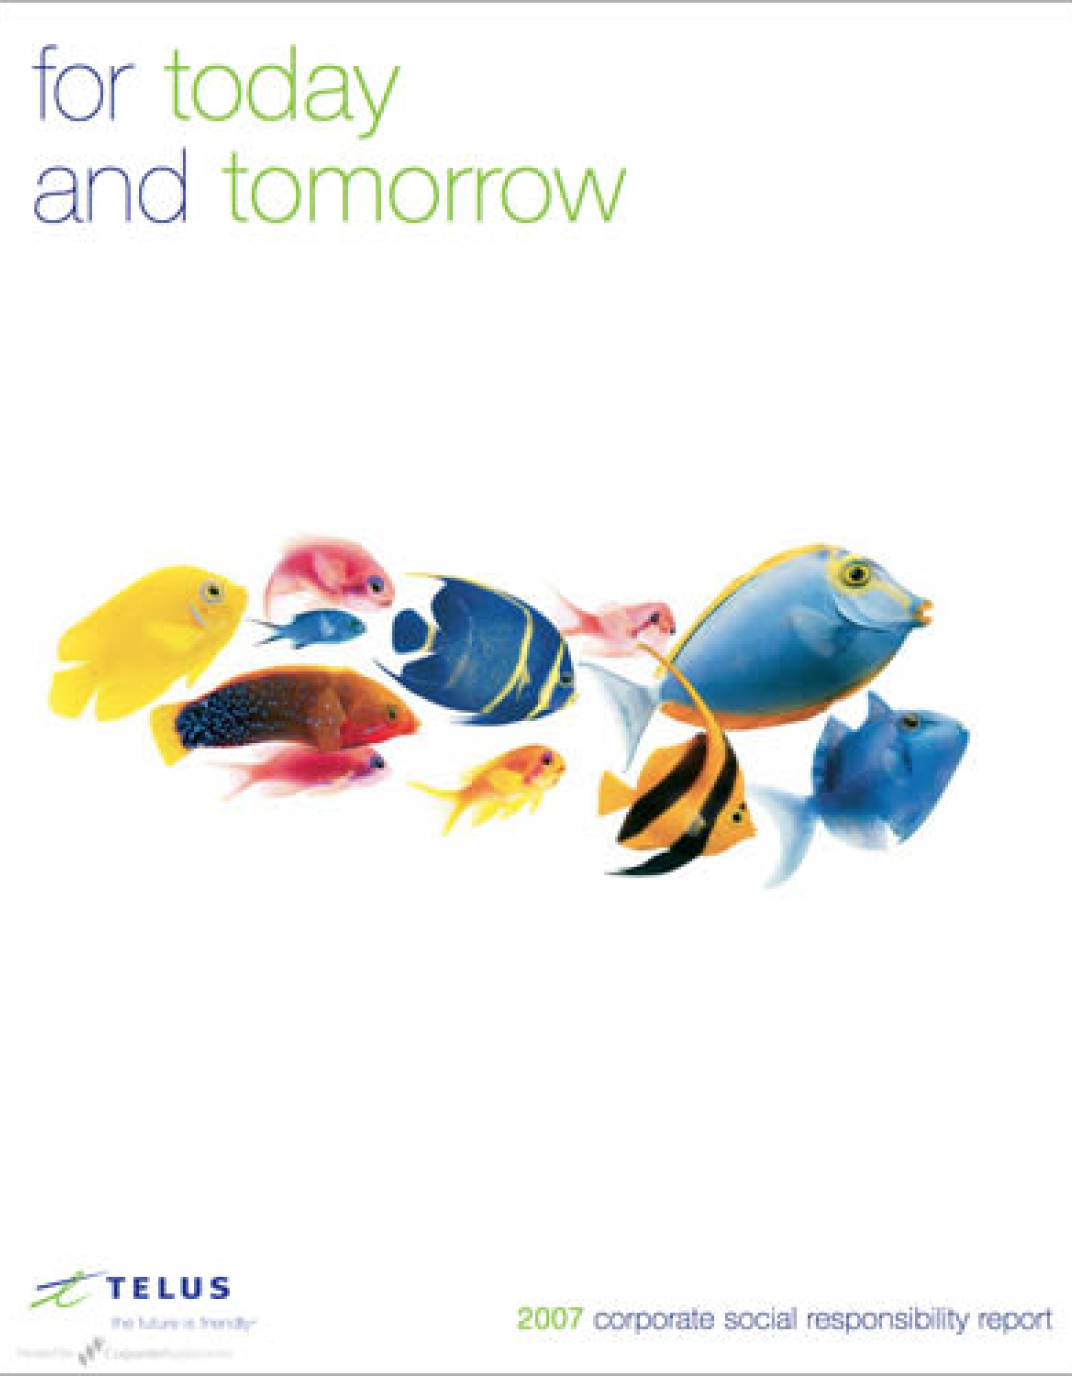 The cover of the 2007 TELUS Sustainability Report